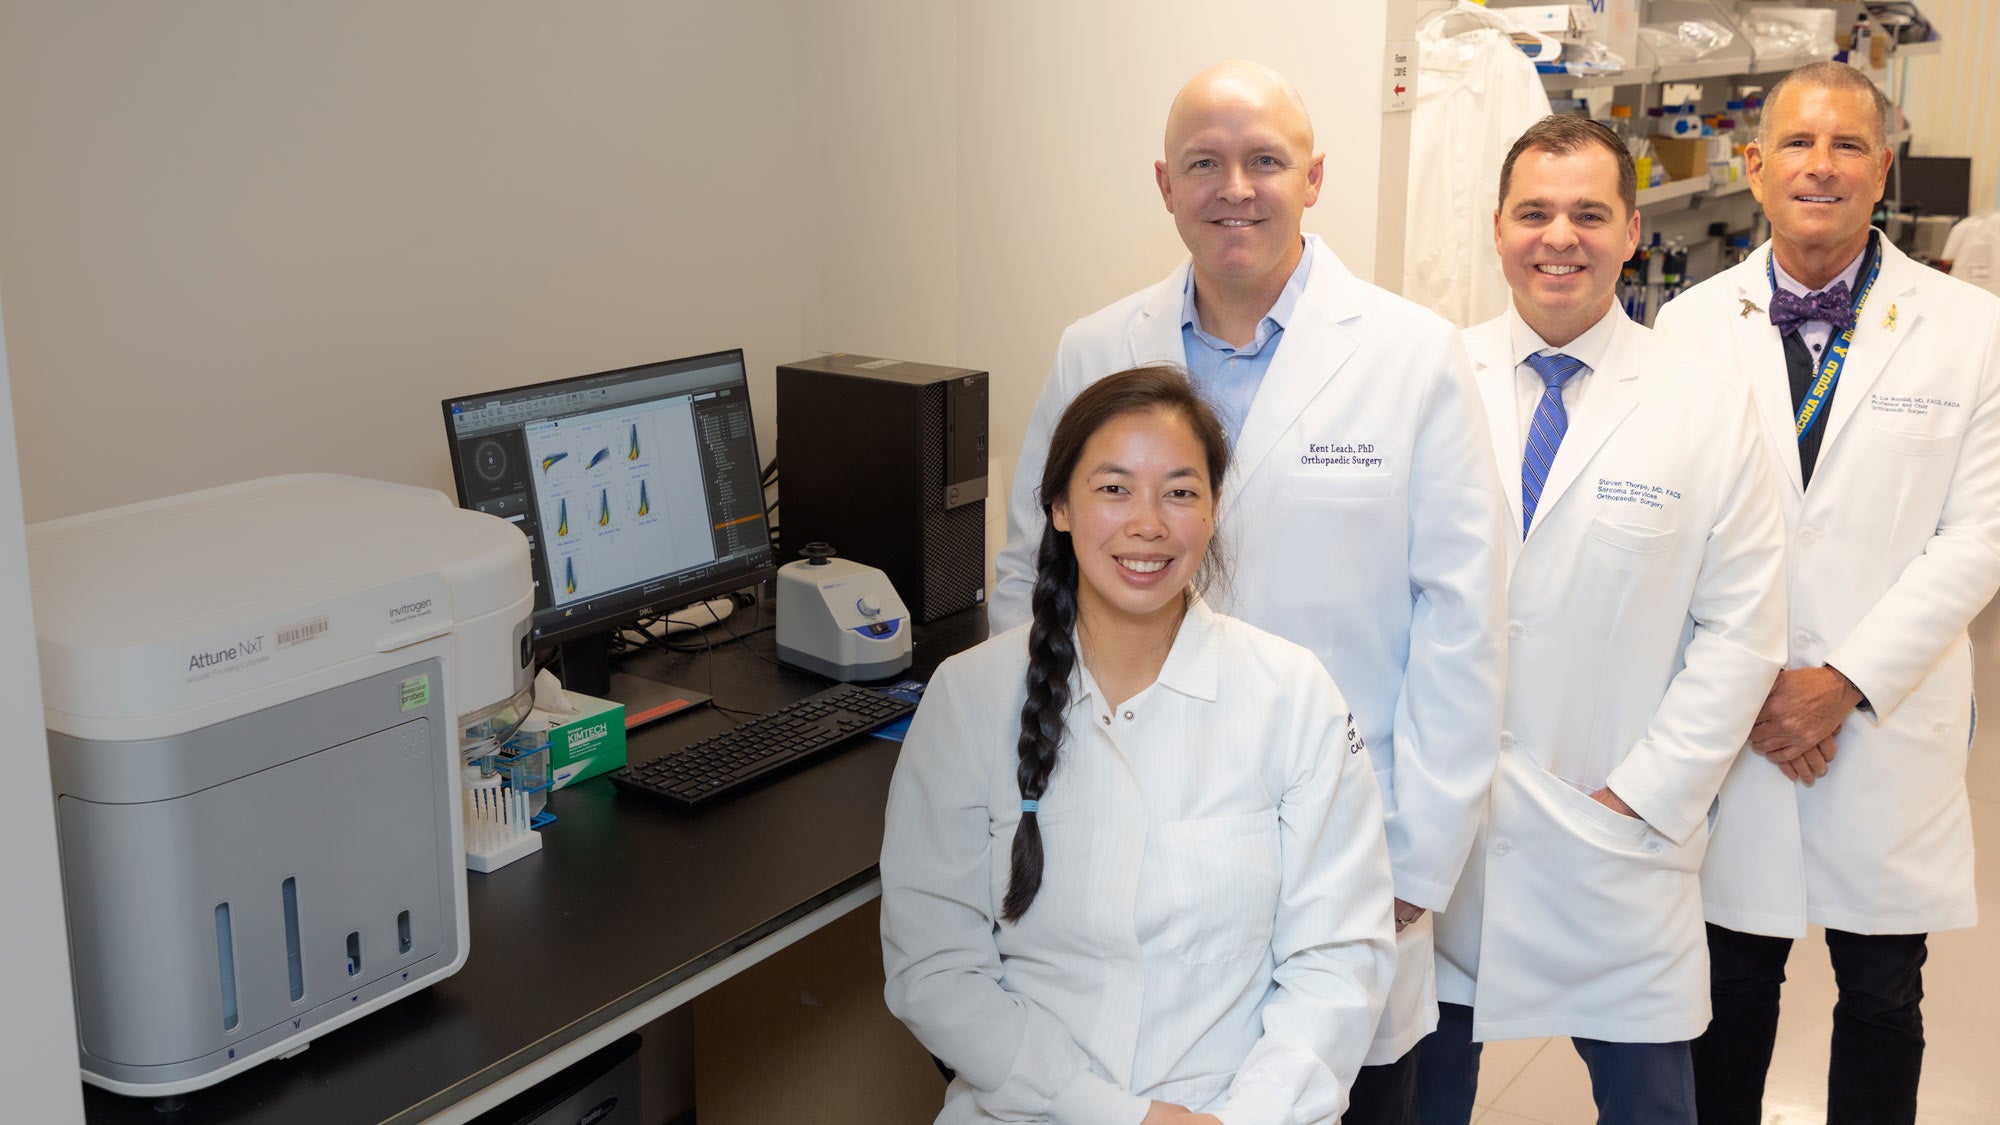 Members of the UC Davis orthopedics engineered bone marrow research team, featuring (from left to right) Katherine Hartman Griffin, Kent Leach, Steven Thorpe and Lor Randall, collaborate in a laboratory setting. (UC Davis)